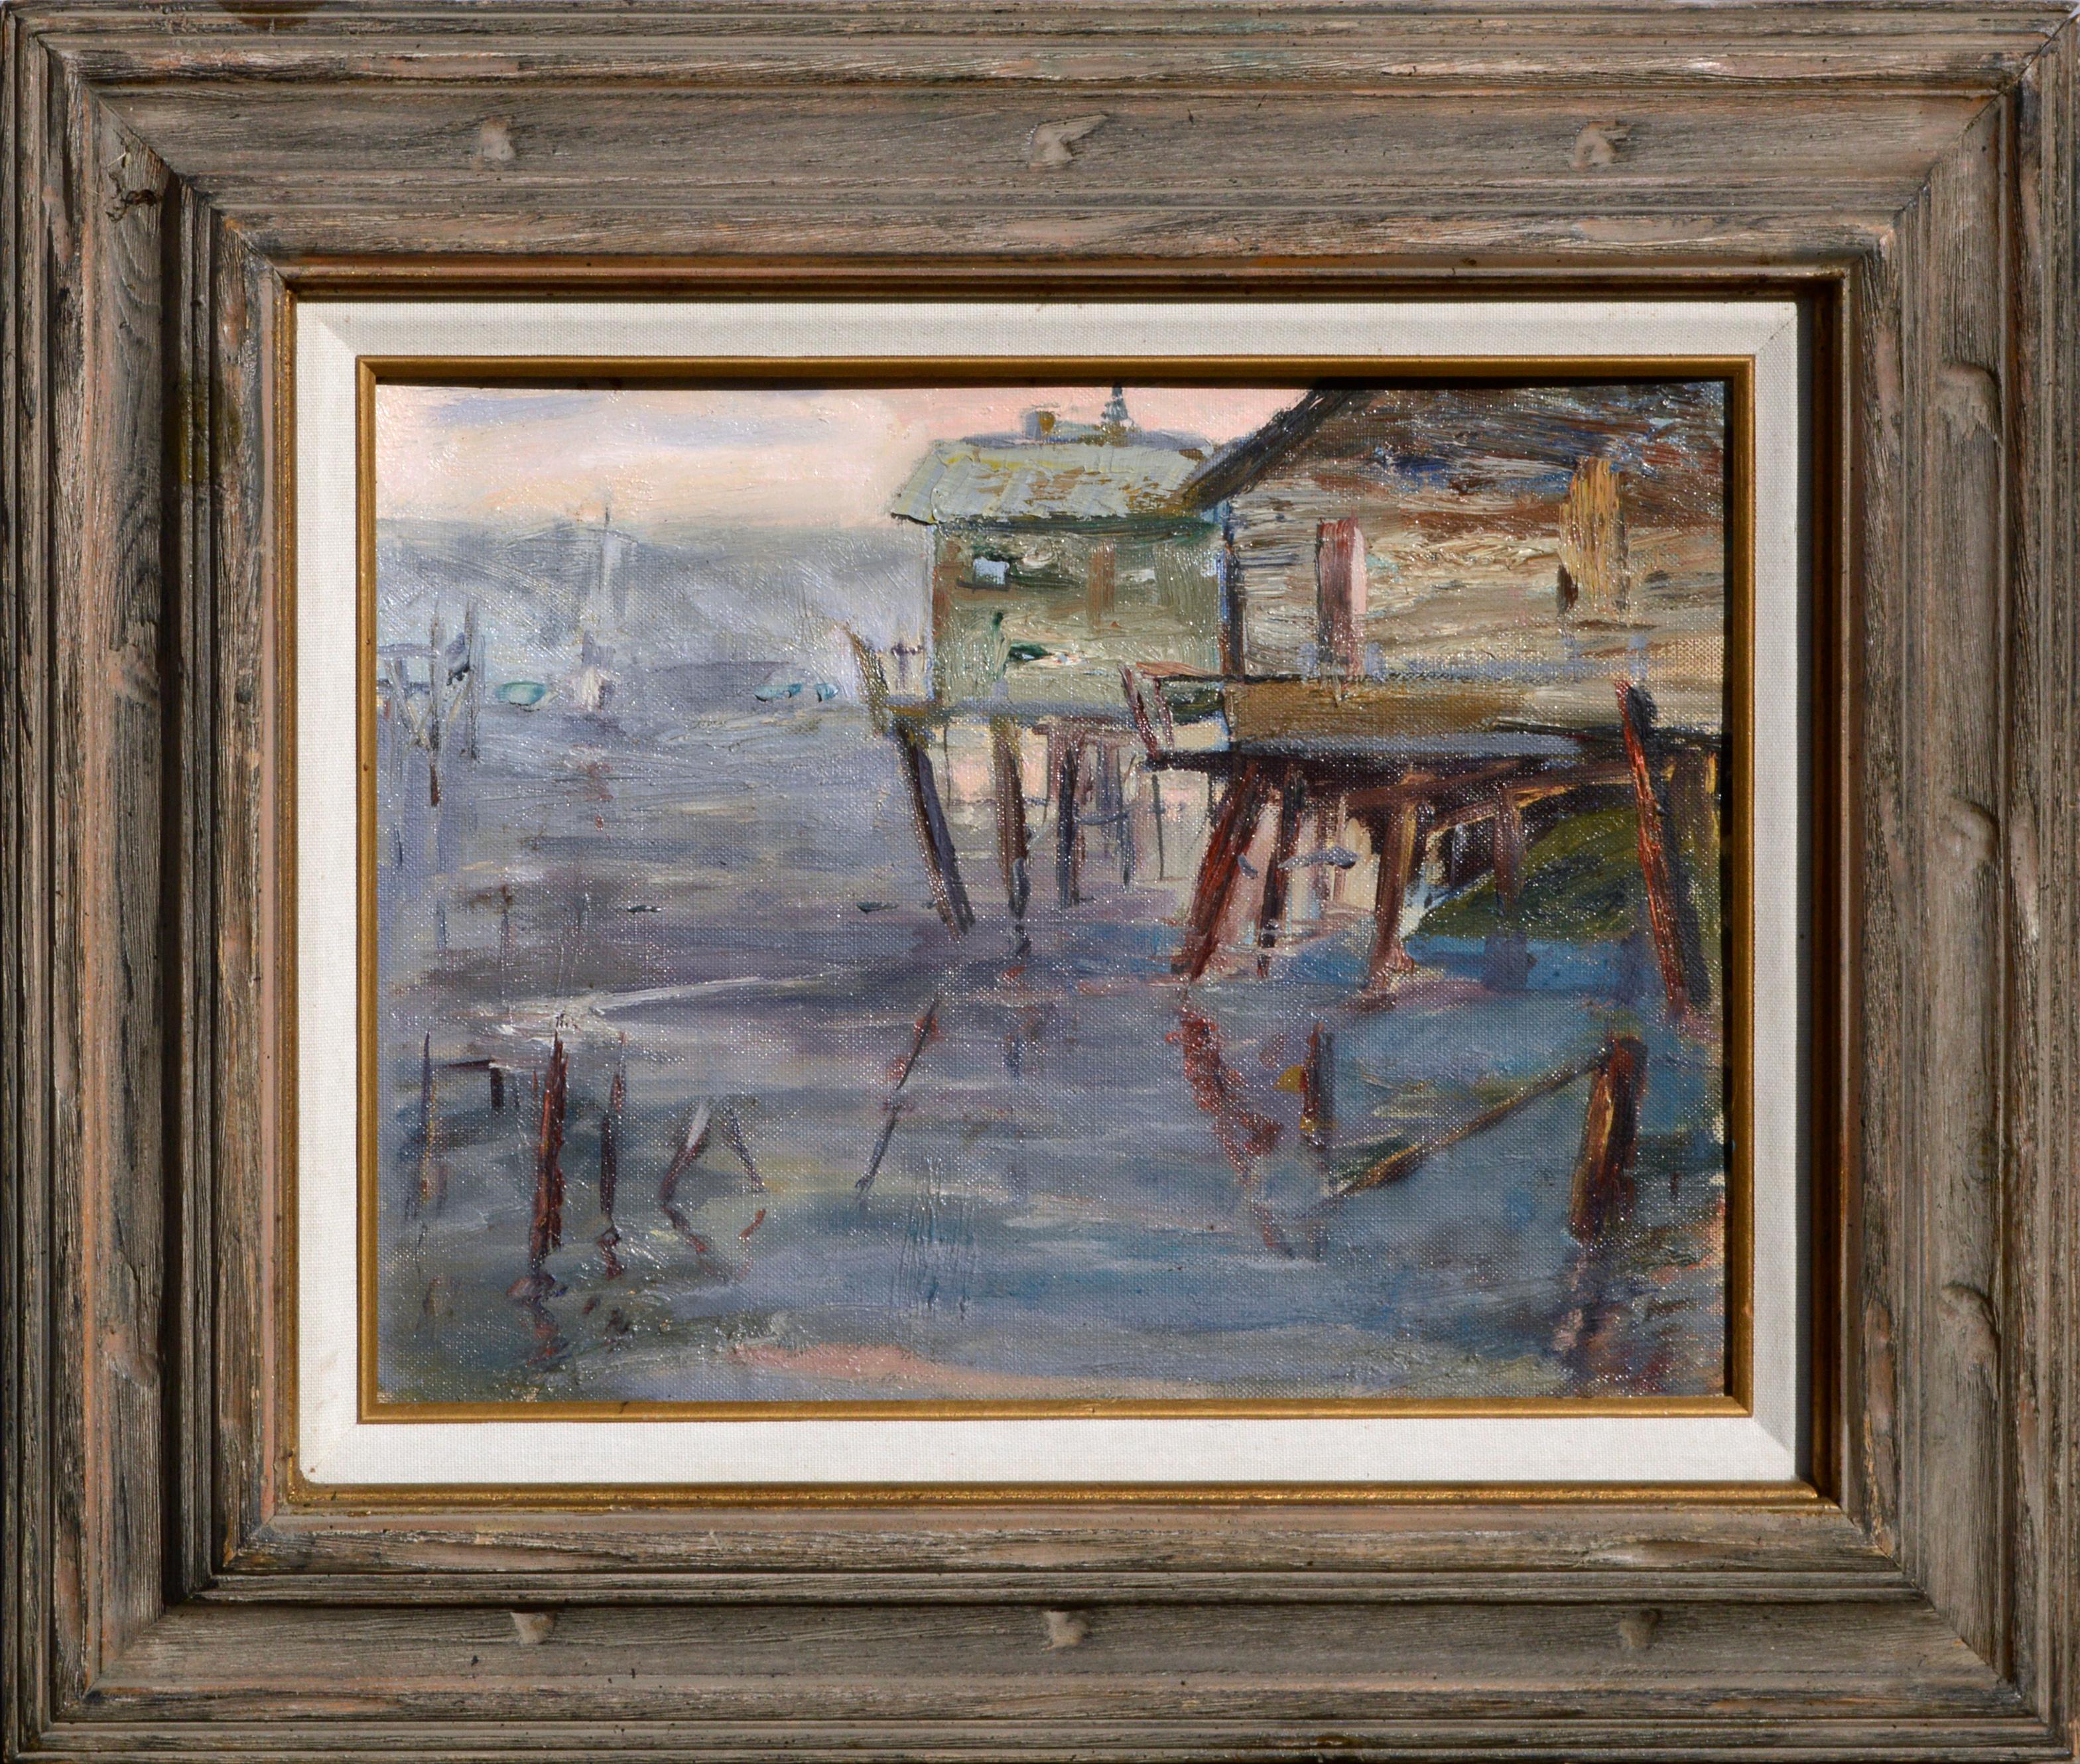 Unknown Landscape Painting - Abstracted Monterey Wharf, Shacks on the Dock Landscape 